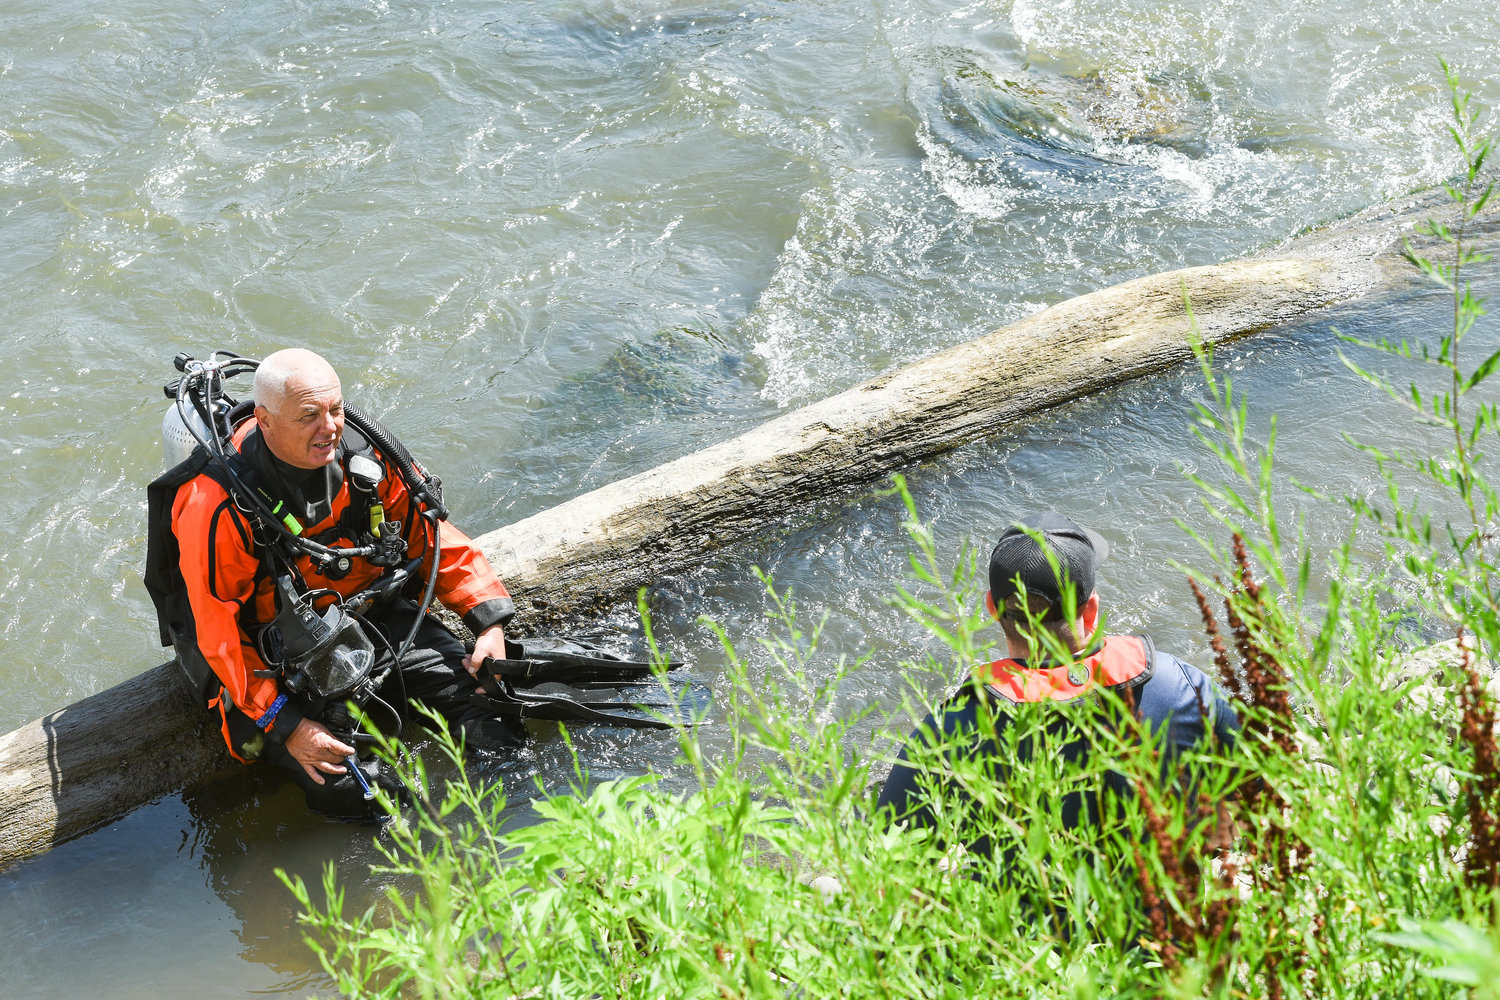 A search is ongoing, as of Thursday morning, on the Mohawk River in Utica following a reported drowning off of Leland Avenue around 6 p.m. on Wednesday, July 27, according to law enforcement officials. The identities of those involved have not yet been released.